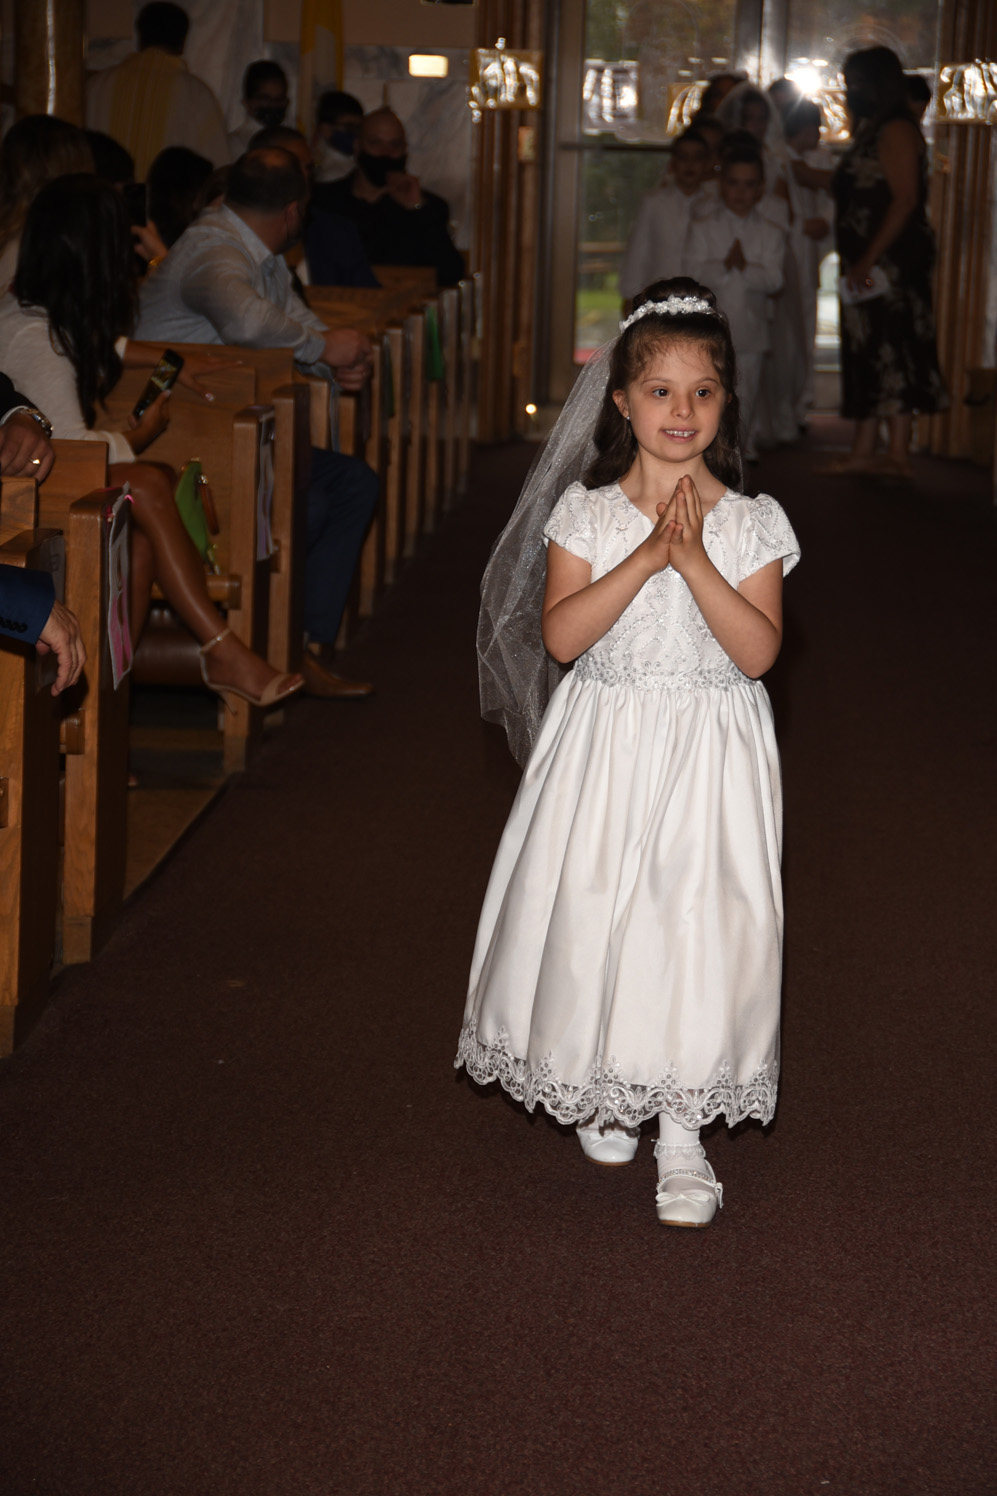 FIRST-COMMUNION-MAY-2-2021-1001001155